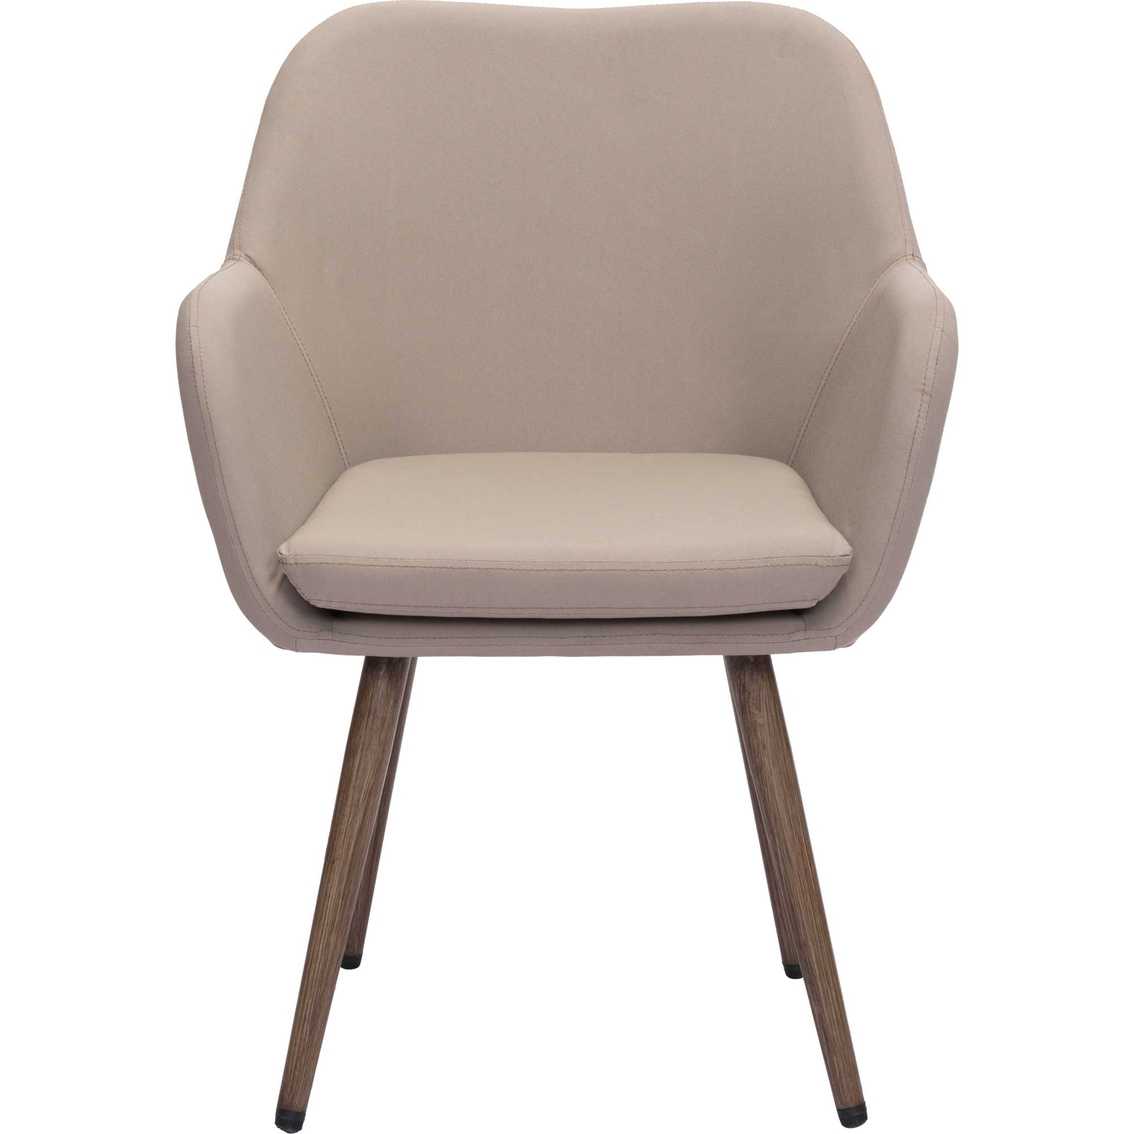 Zuo Modern Pismo Dining Chair - Image 3 of 7